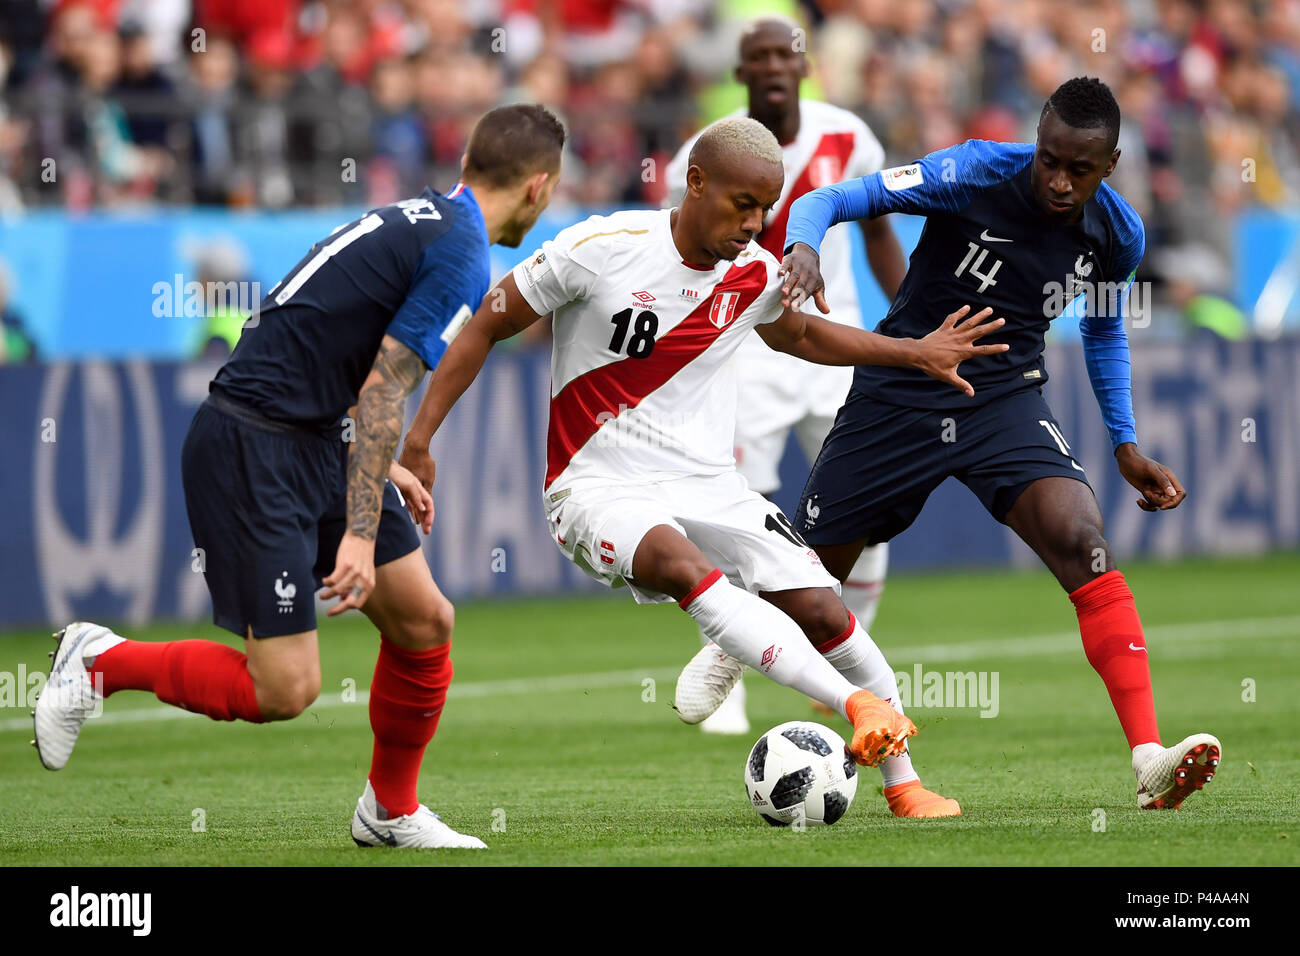 21 June 2018, Russia, Yekaterinburg - Soccer World Cup 2018, France vs. Peru, Preliminary round, group C, Second game day at the Yekaterinburg arena: Lucas Hernandez (L) and Blaise Matuidi from France play against Peru's Andre Carrillo. Photo: Marius Becker/dpa Credit: dpa picture alliance/Alamy Live News Credit: dpa picture alliance/Alamy Live News Stock Photo